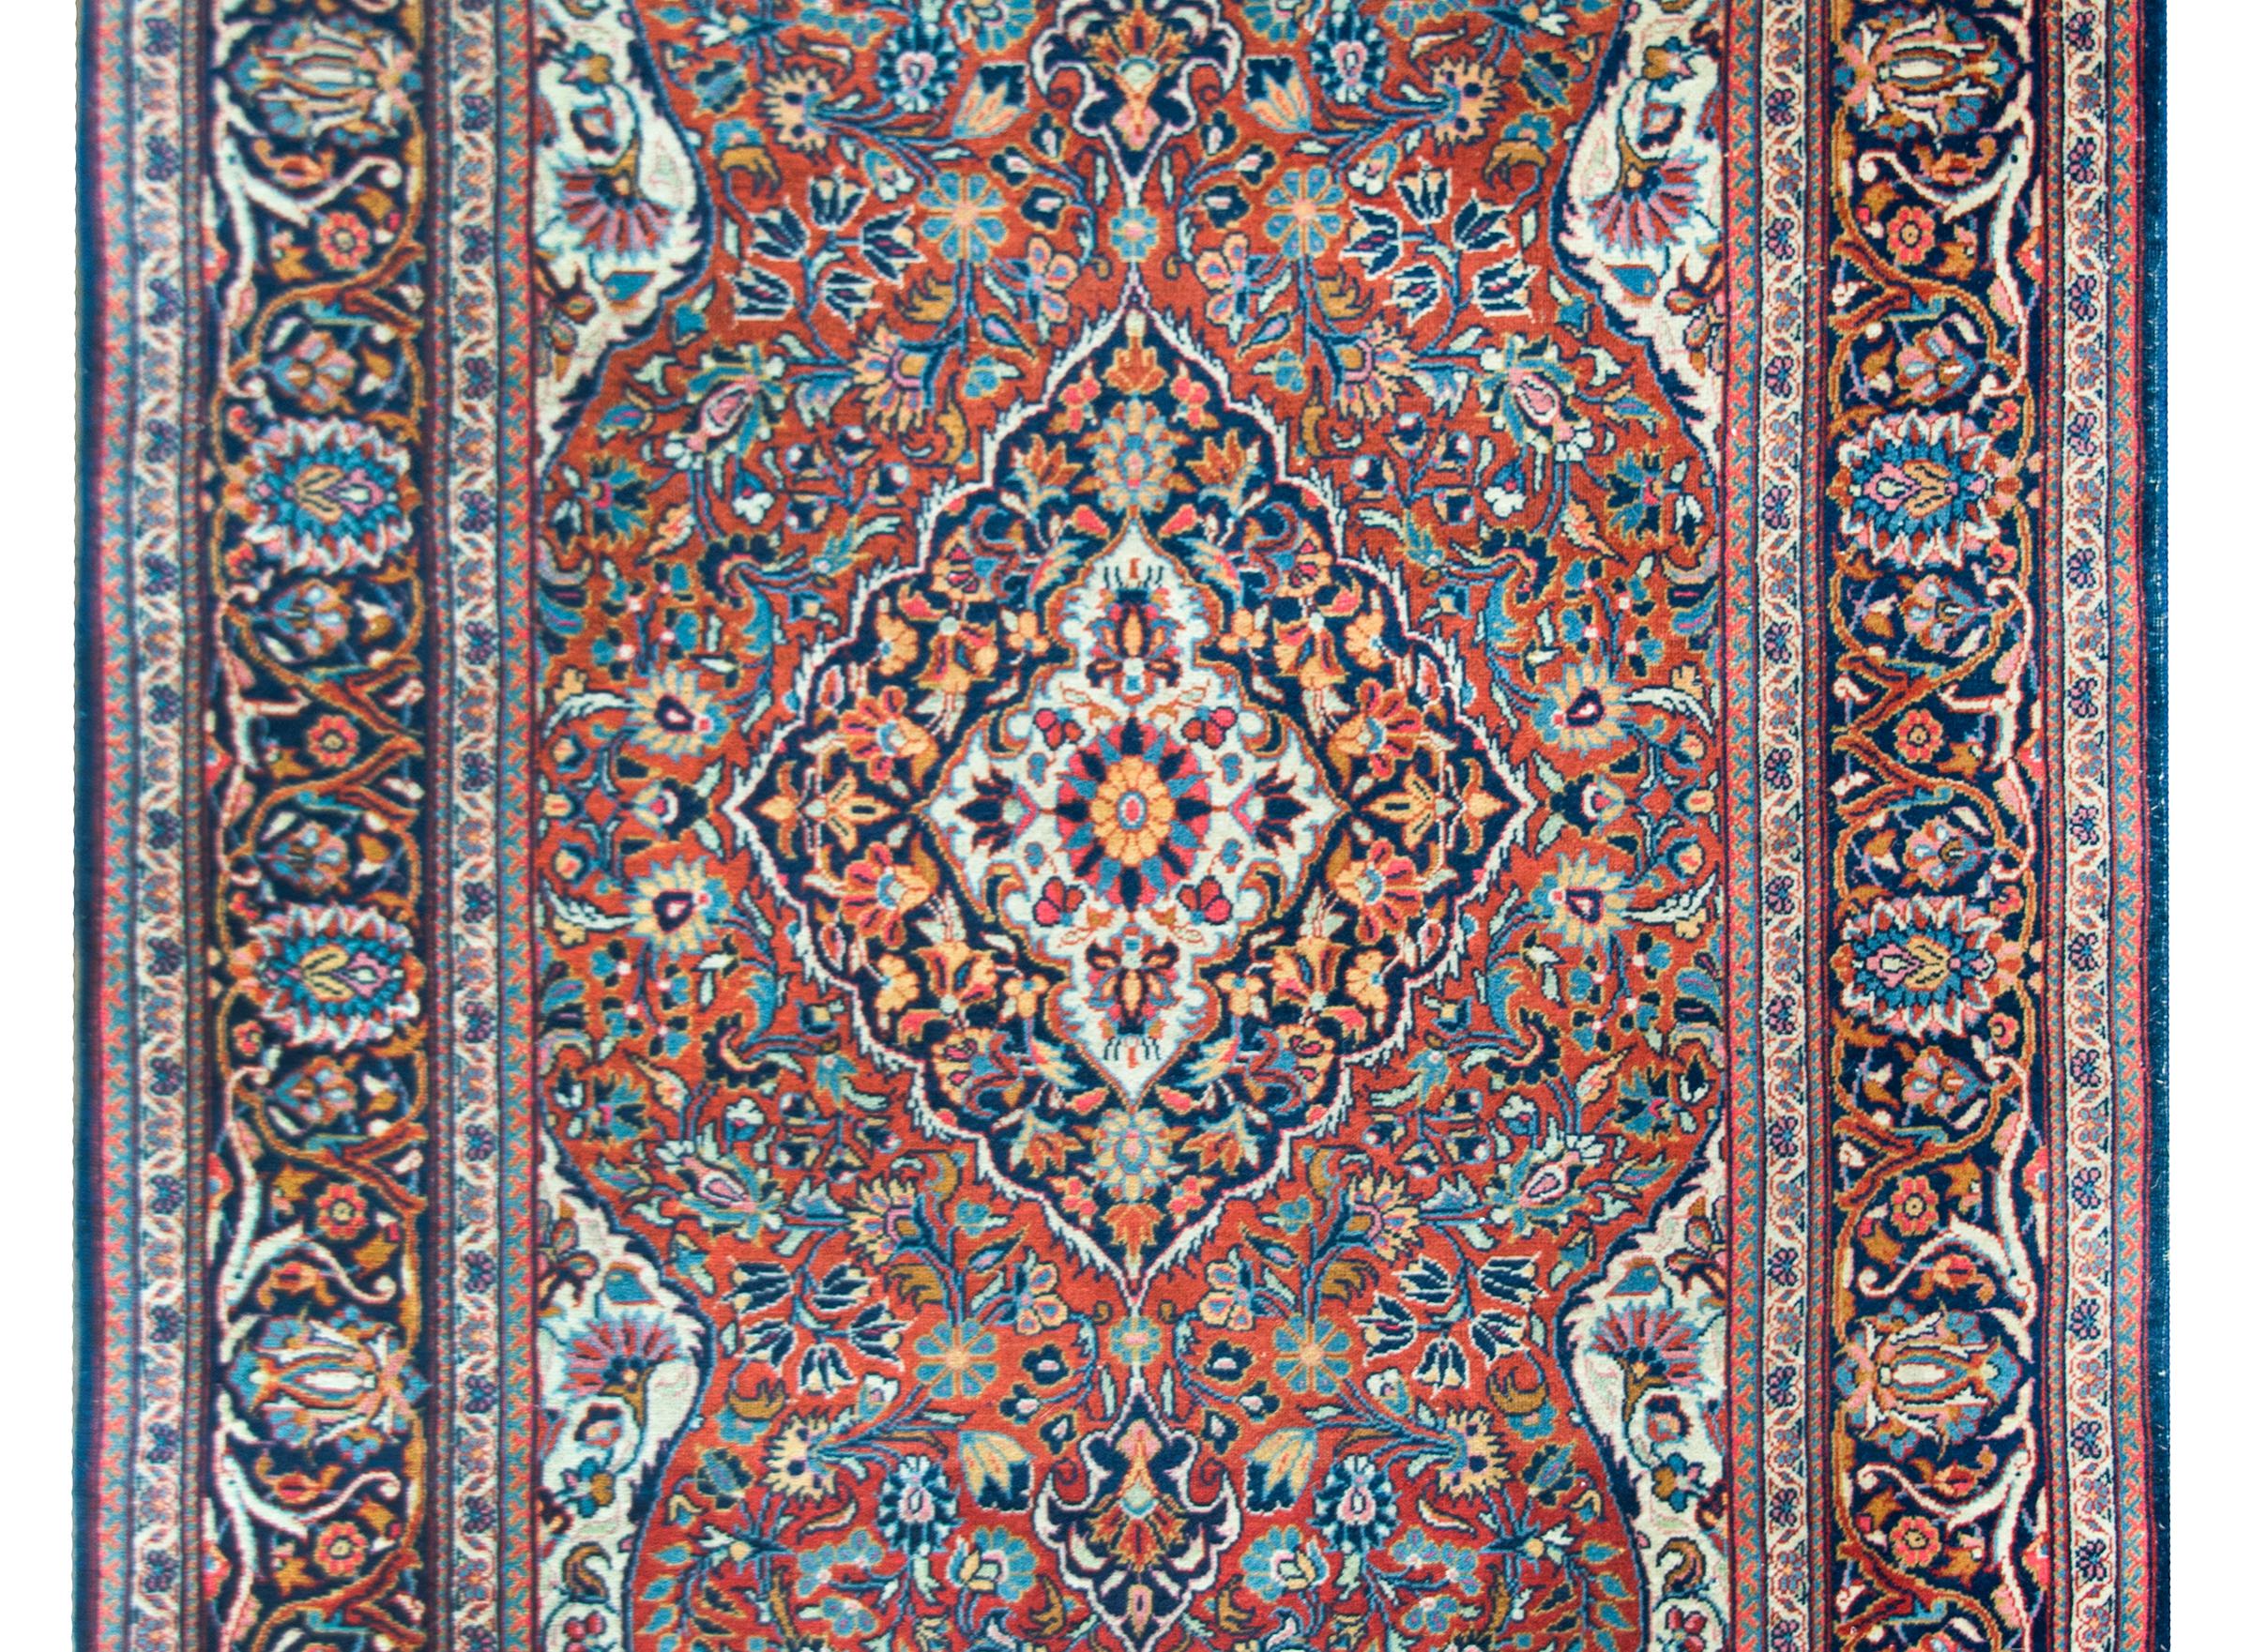 A playful early 20th century Persian Kashan rug with a wonderful central floral medallion woven in crimson, indigo, coral, and orange, all set against a floral and scrolling vine field against a crimson background. The border is stunning, with a